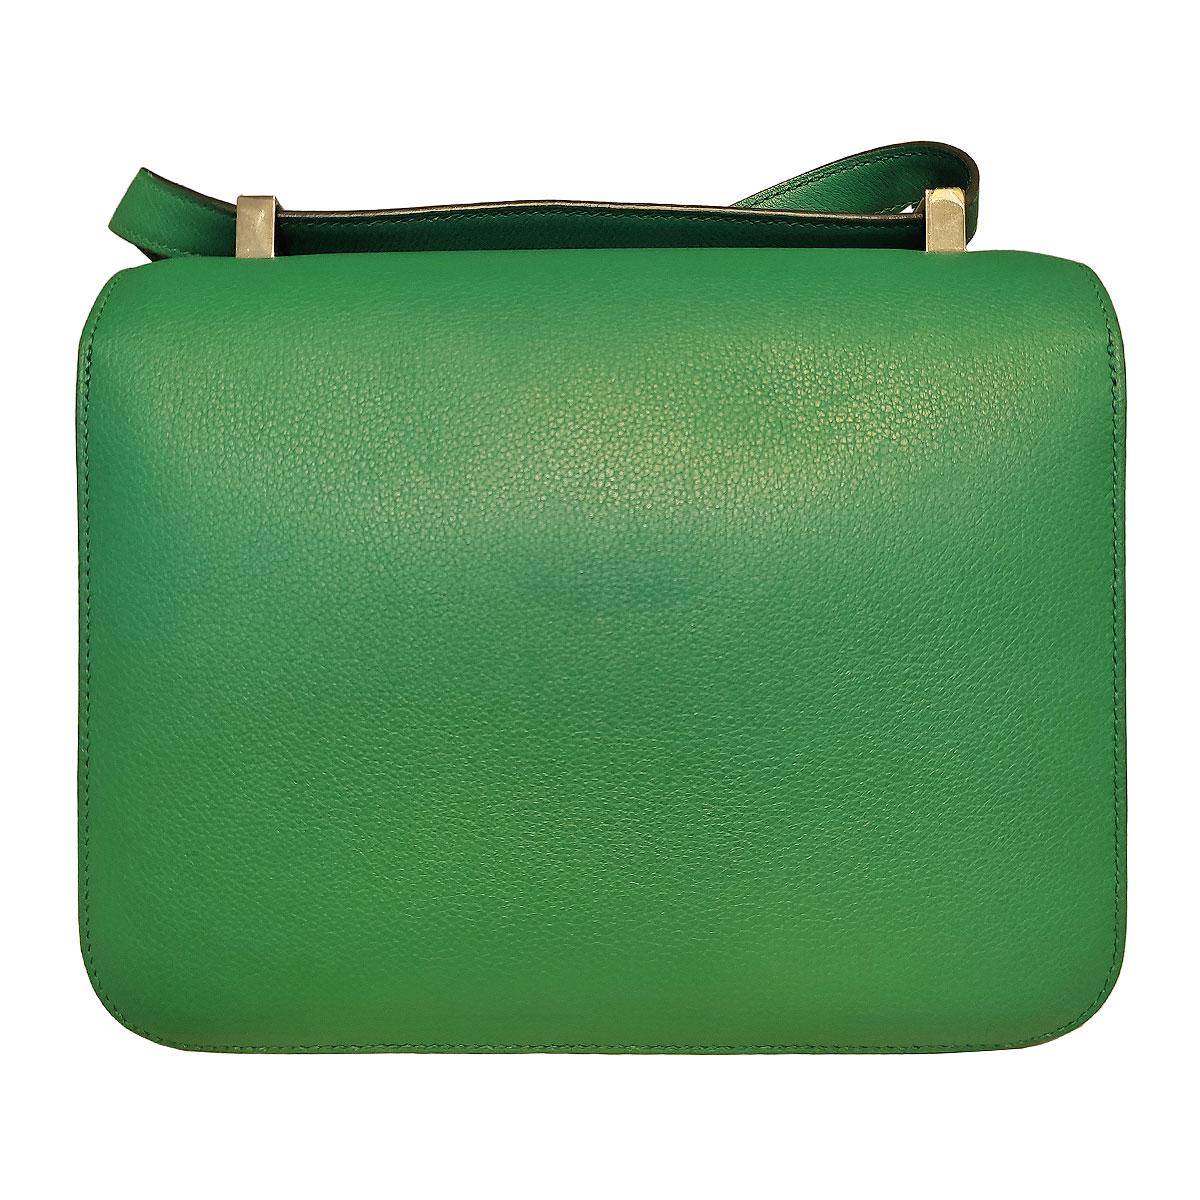 Spectacular Constance 24 bag in very good conditions 
Year 2018
Ultra rare Green Vertigo color (U4)
Leather
Supersoft in the internal
Silver colored metal
Comes with dustbag
Hermes paper satchel doesn't belong to the bag, but it is included for the